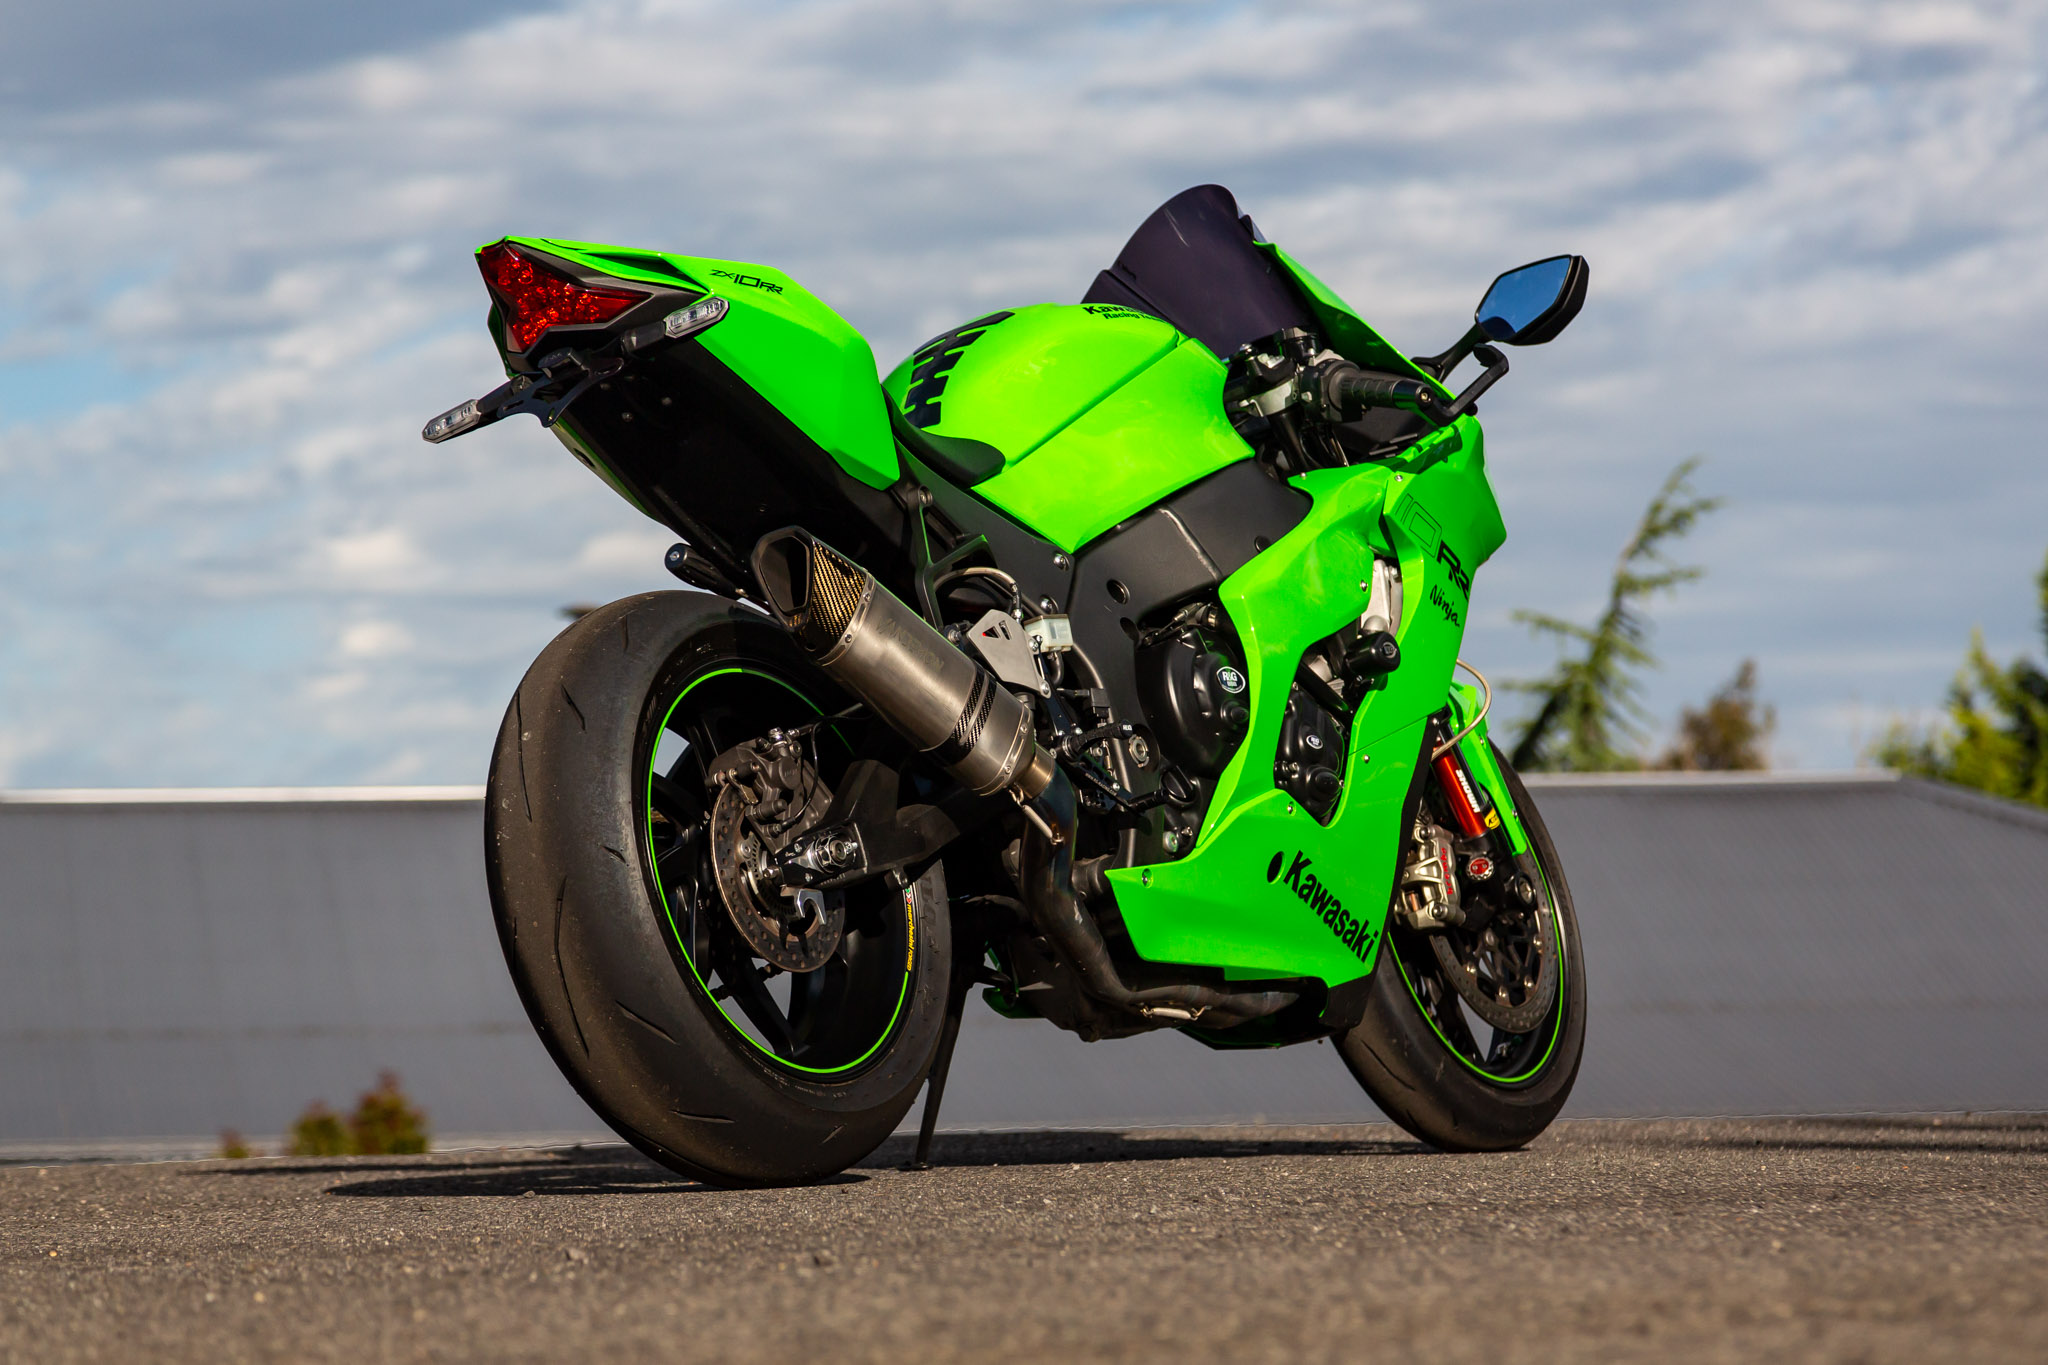 2020 Kawasaki Ninja ZX-10RR for sale by auction in Melbourne, VIC 